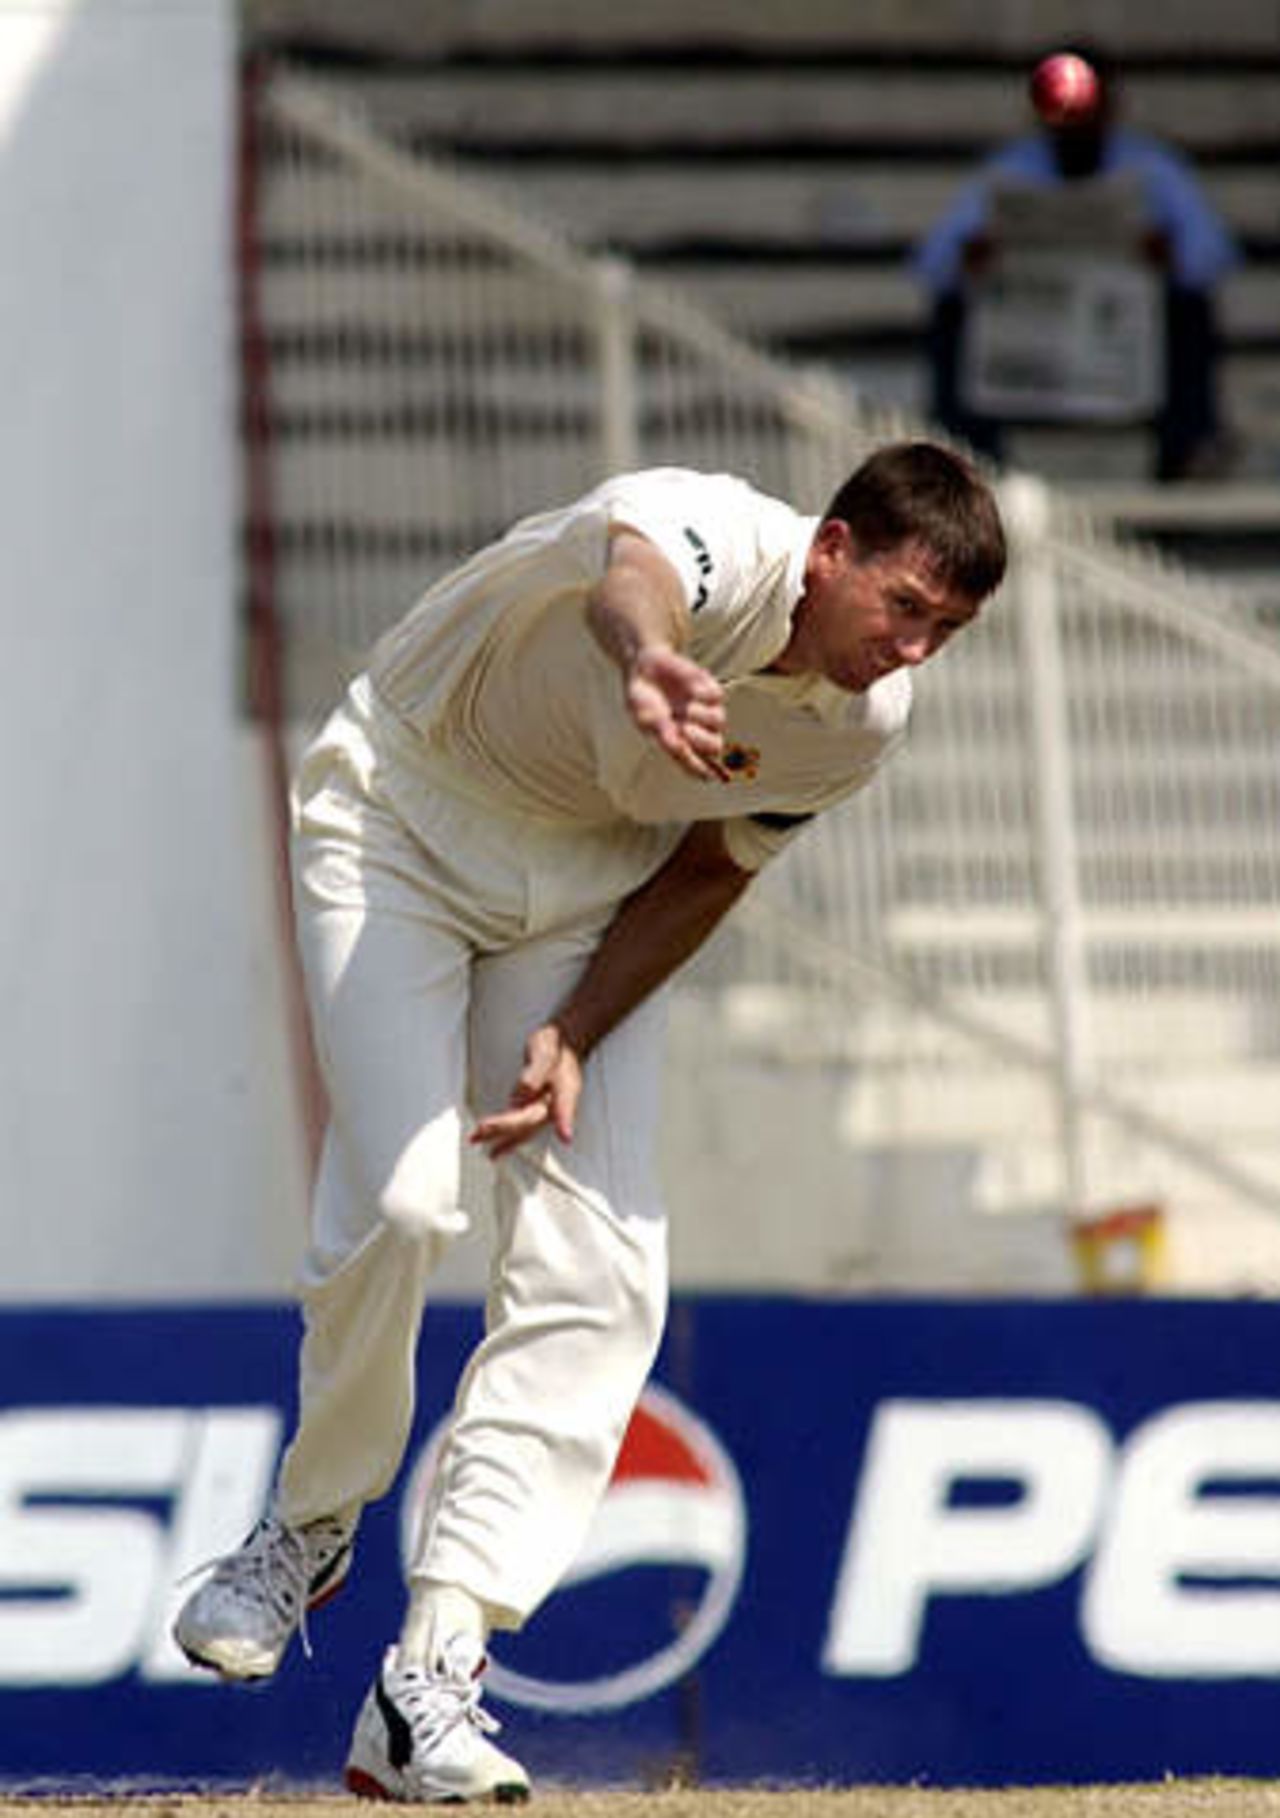 Australian bowler Glenn Mcgrath in action against Pakistan on the third day of the third Test in Sharjah Cricket Stadium October 21, 2002. McGrath took his 400 test wicket when he dismissed Pakistan captain Waqar Younis.